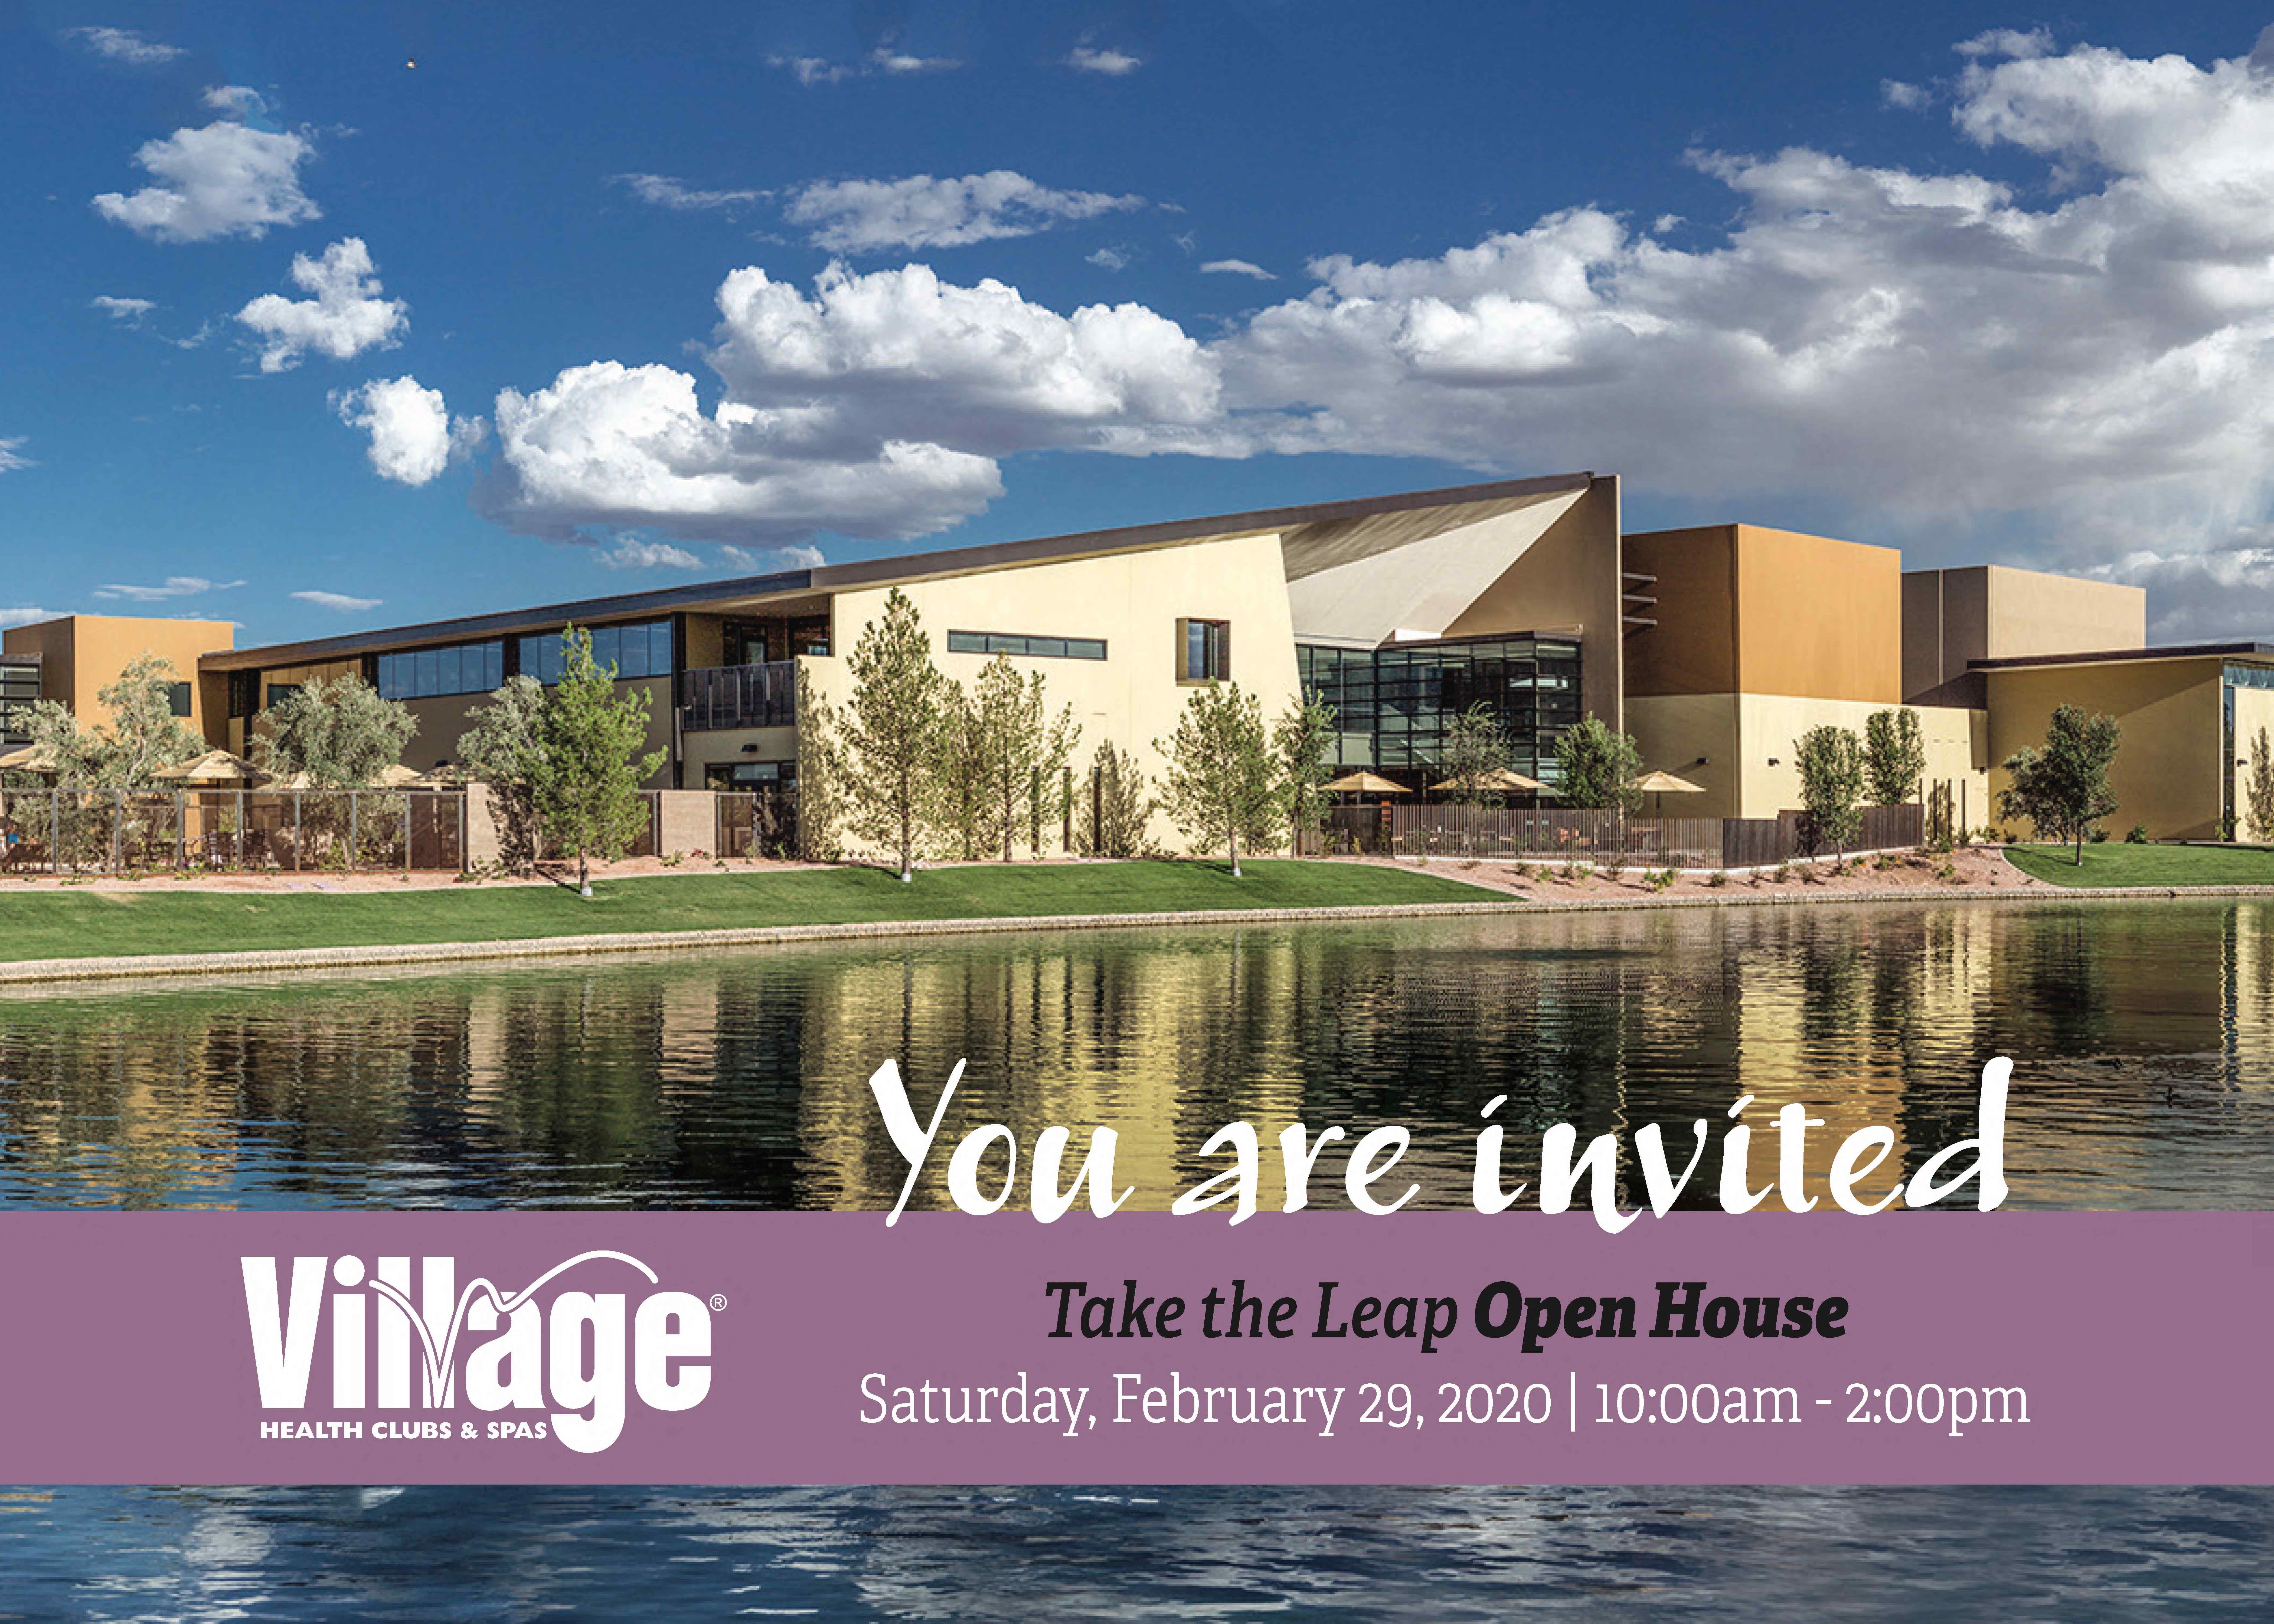 Take the Leap Open House at Ocotillo Village